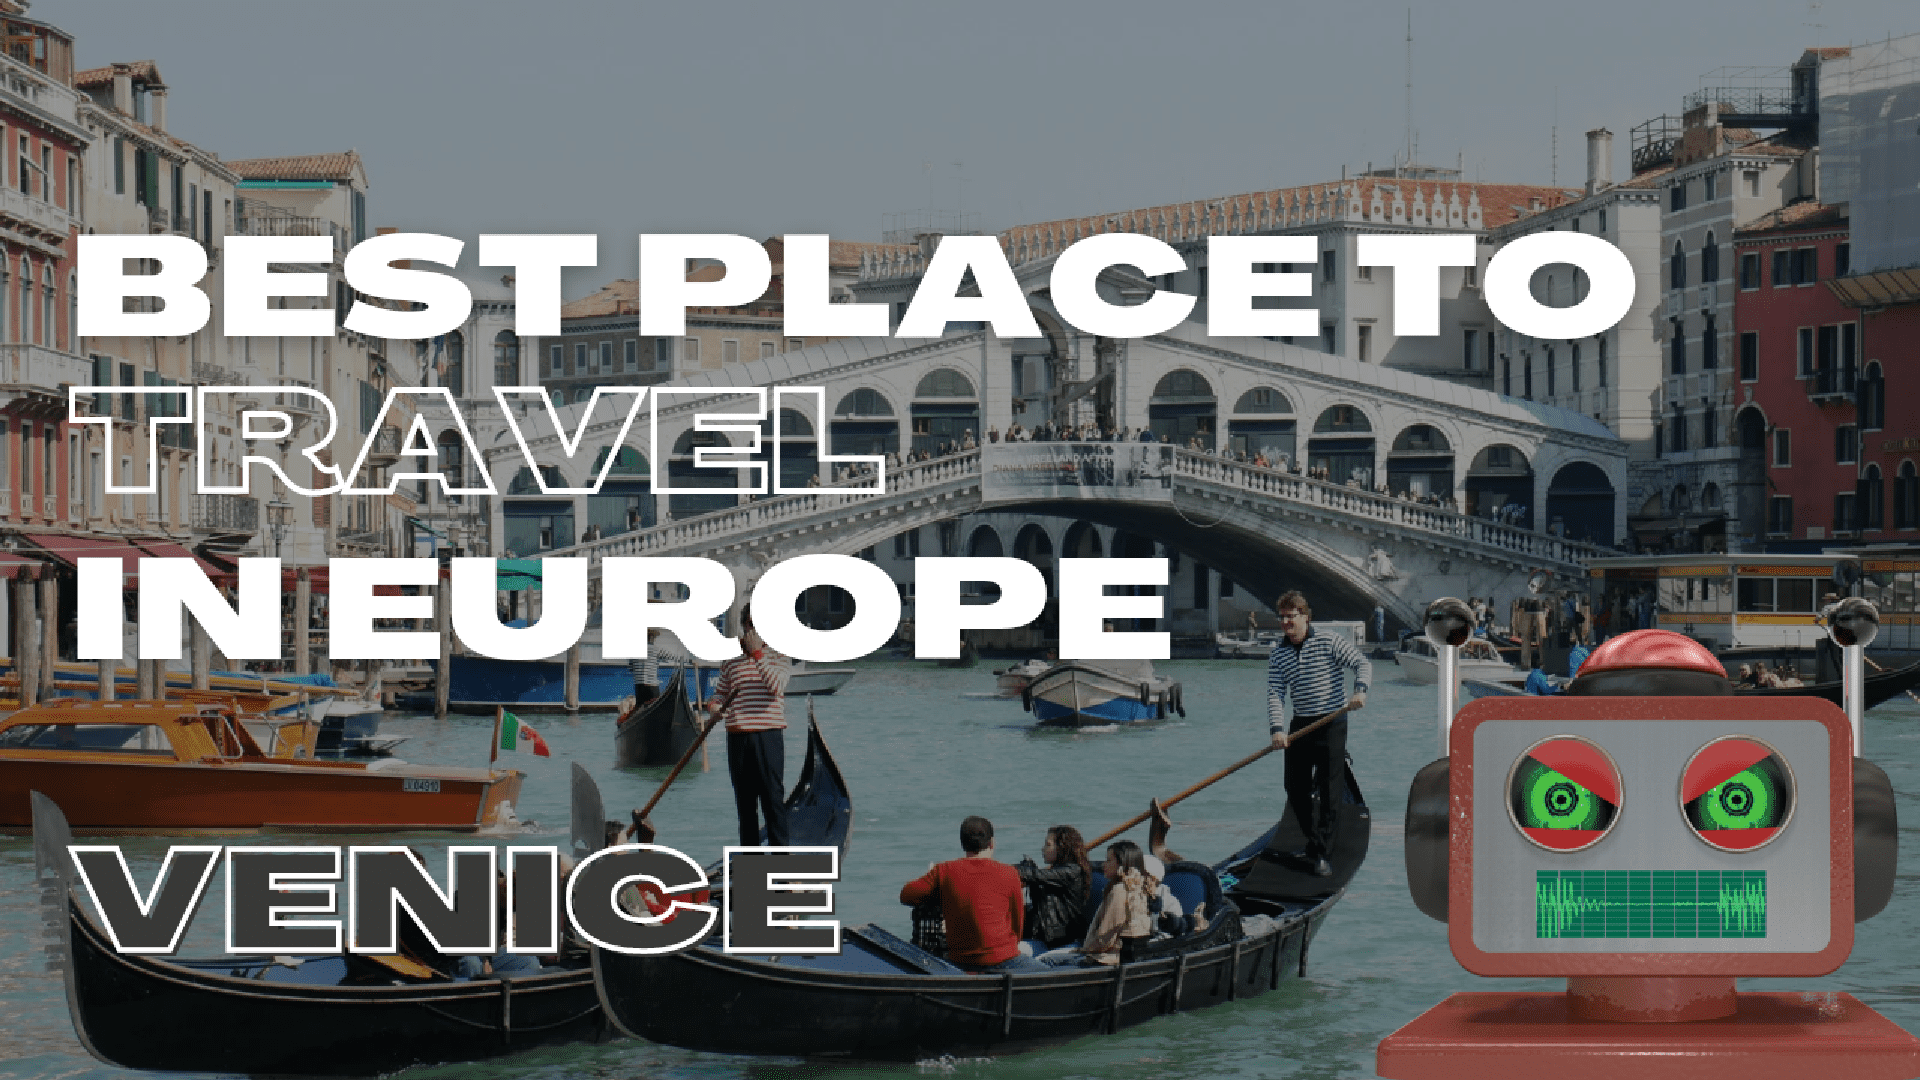 BEST PLACE TO TRAVEL IN EUROPE (Venice)